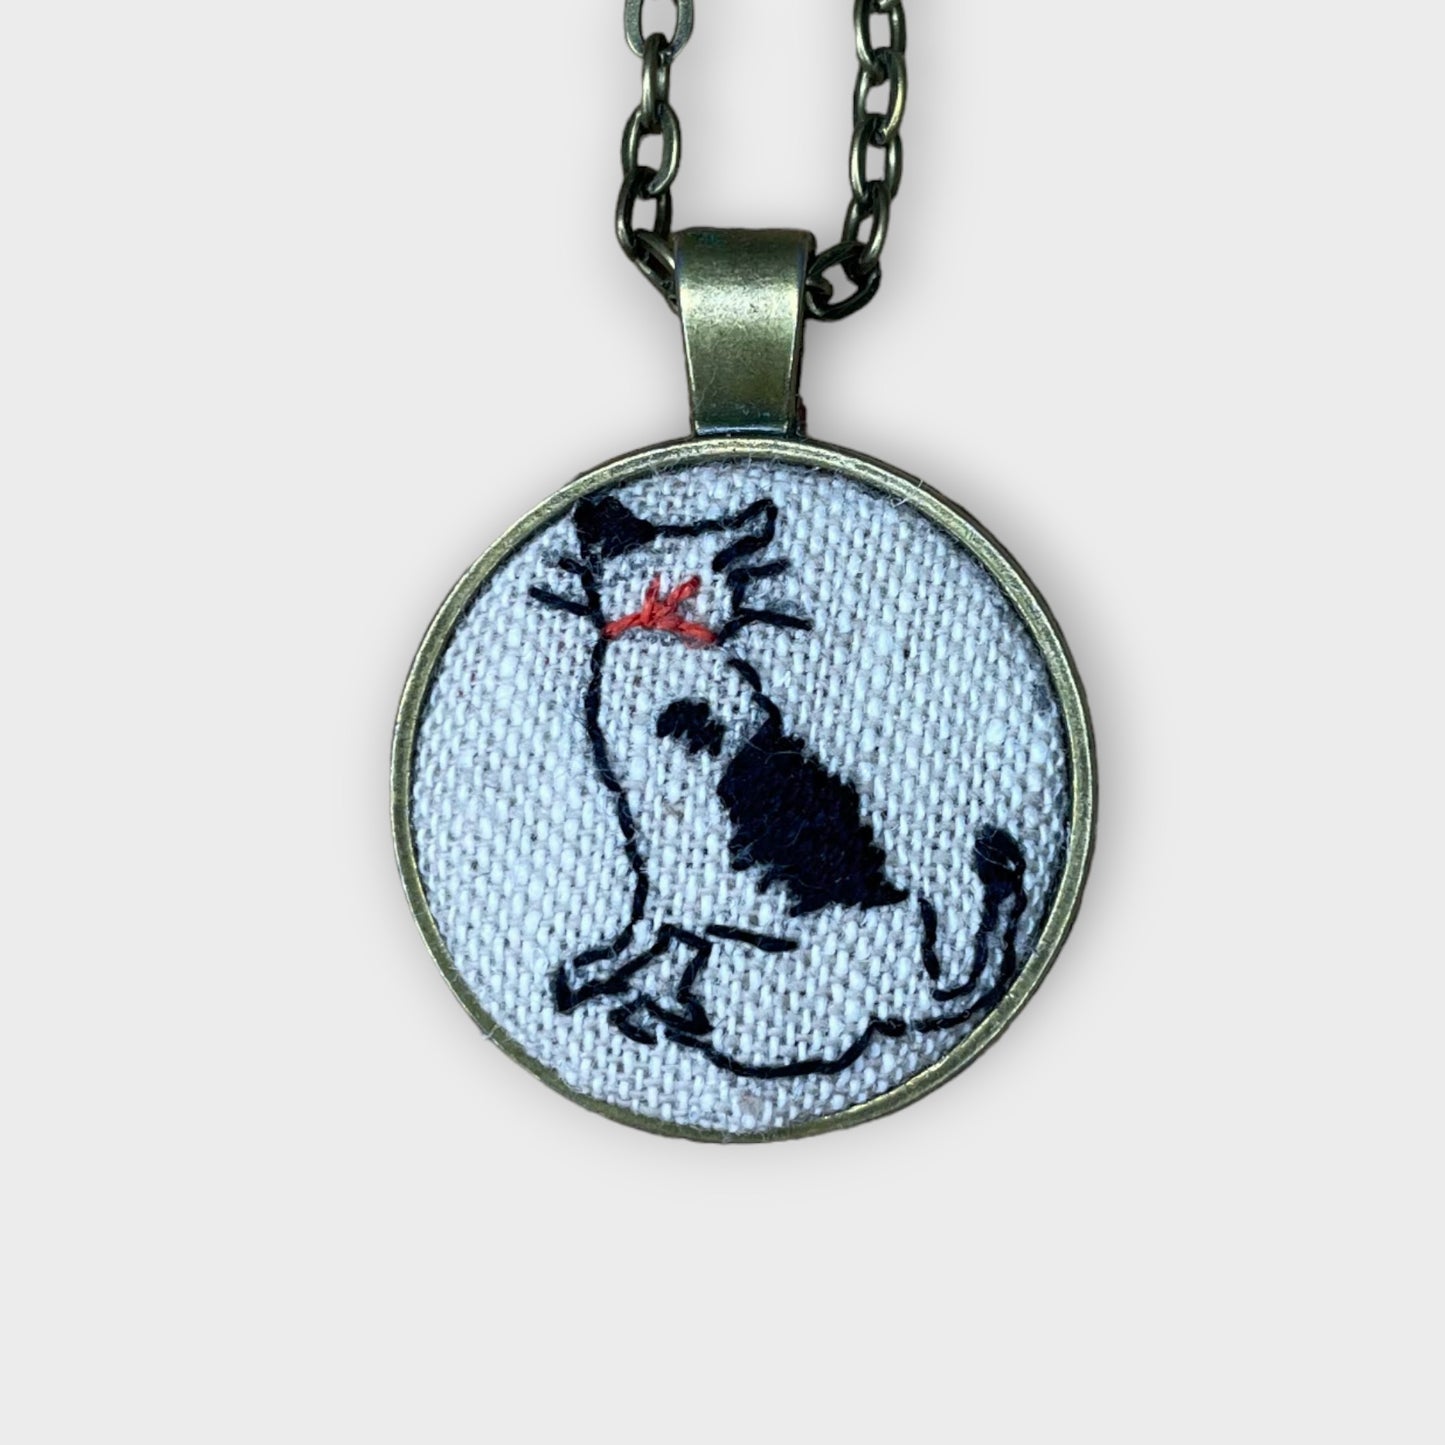 Hand embroidered cat looking away necklace